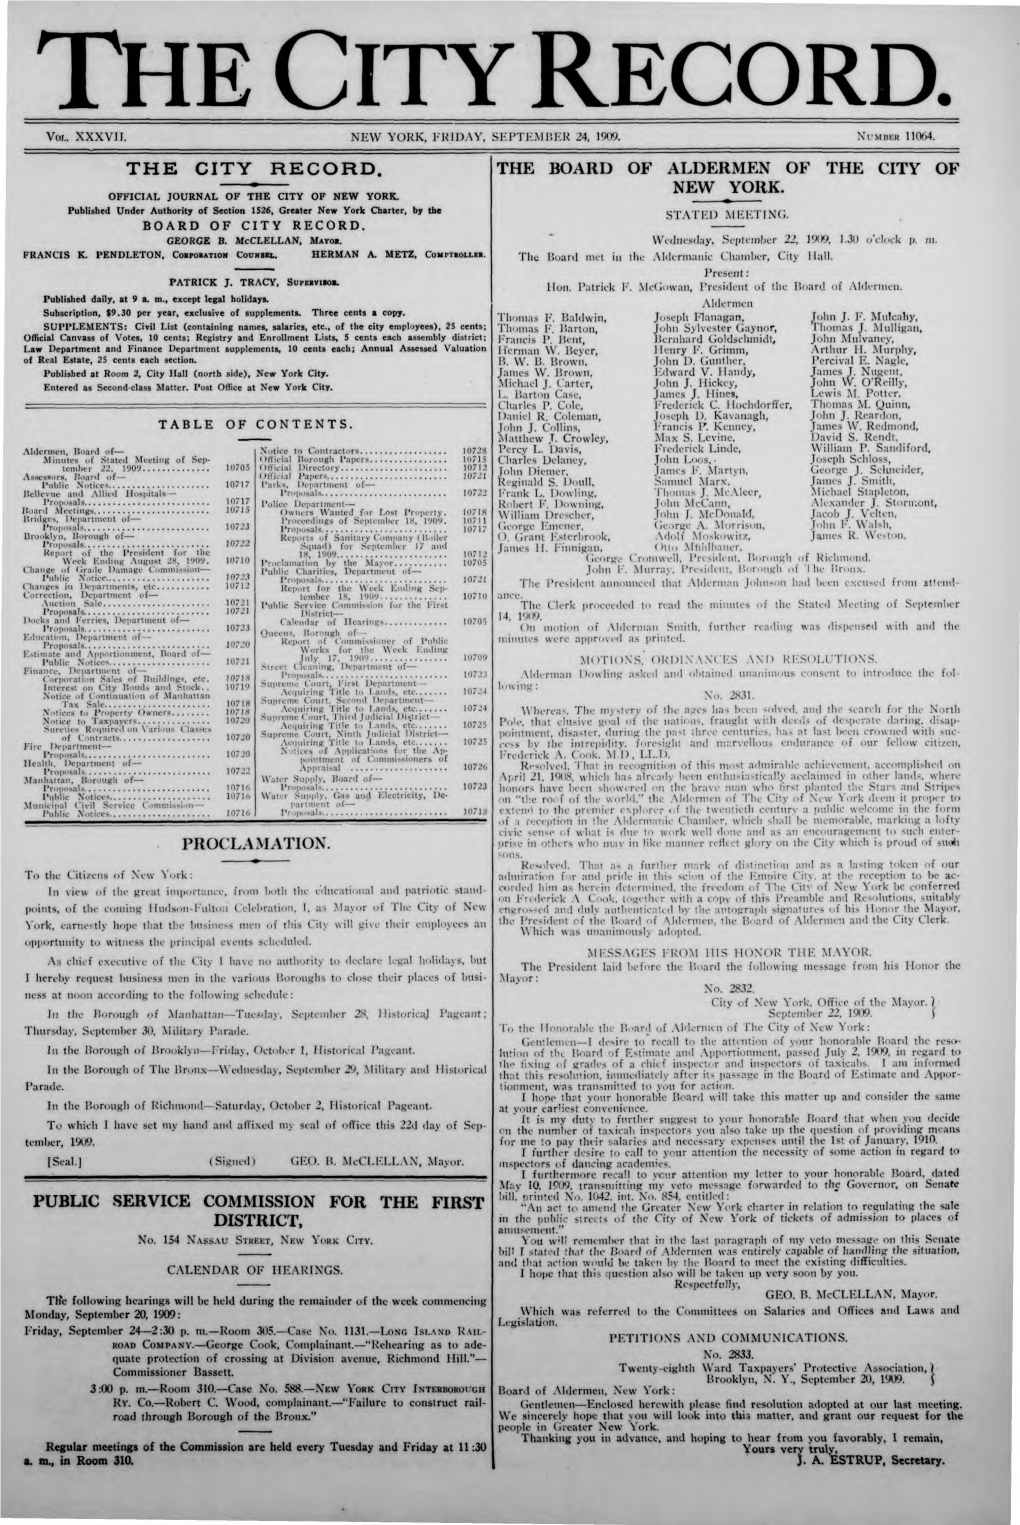 The City Record. the Board of Aldermen of the City of New York. Proclamation. Public Service Commission for the First District